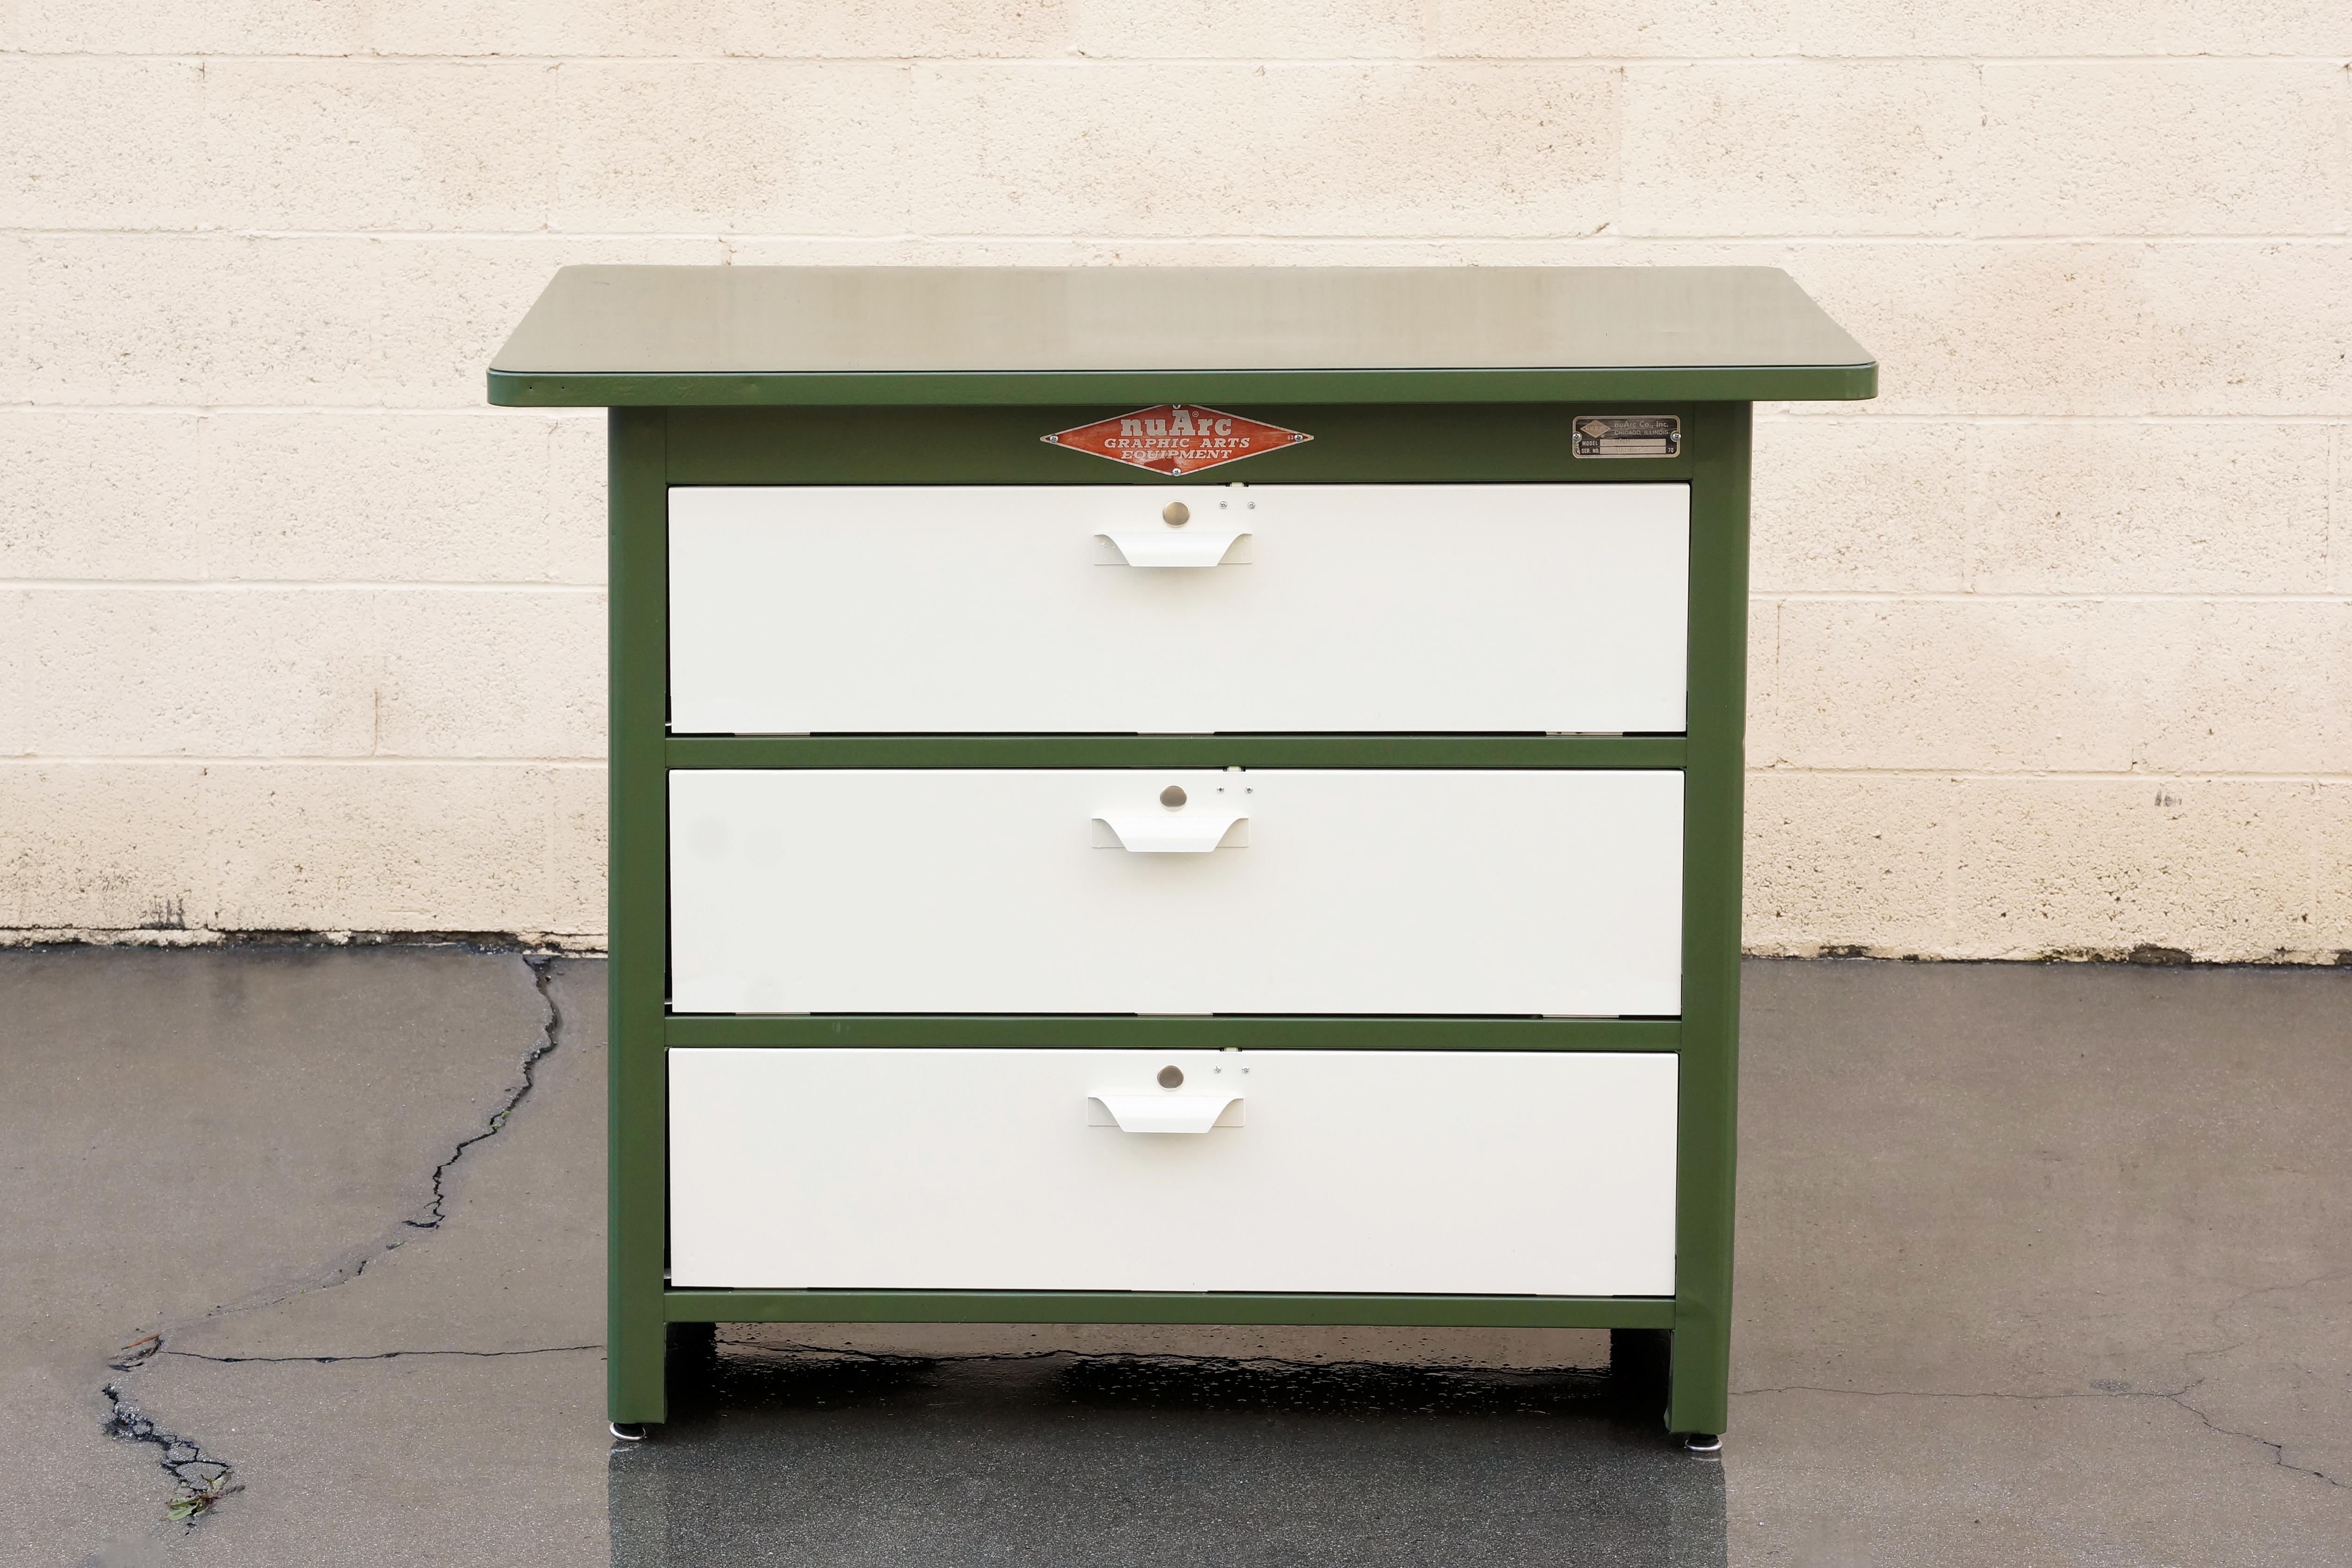 1960s Tool Cabinet by Nuarc Graphic Arts Equipment, Refinished in Army Green (Moderne der Mitte des Jahrhunderts)